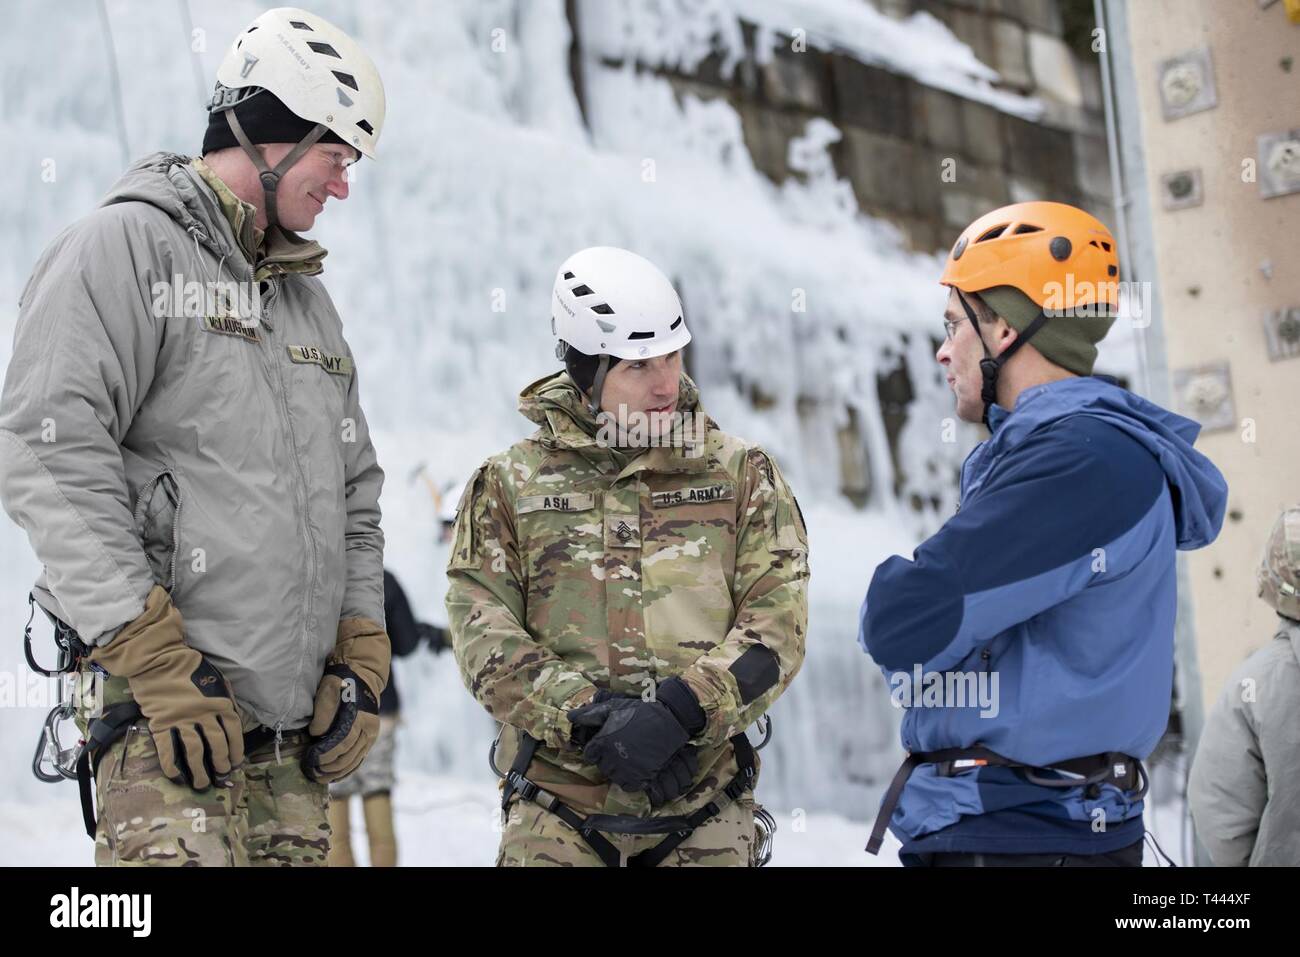 U.S. Army Staff Sgt. Timothy MCLaughlin, left and Staff Sgt. Nick Ash, both instructors with the Army Mountain Warfare School, speak with Secretary of the Army Dr. Mark T. Esper at the Army Mountain Warfare School on Camp Ethan Allen Training Site, Jericho, Vt., March 16, 2019. Esper was able to observe and visit with students currently in the both the Basic Military Mountaineering Course and Advanced Military Mountaineering Course. Stock Photo